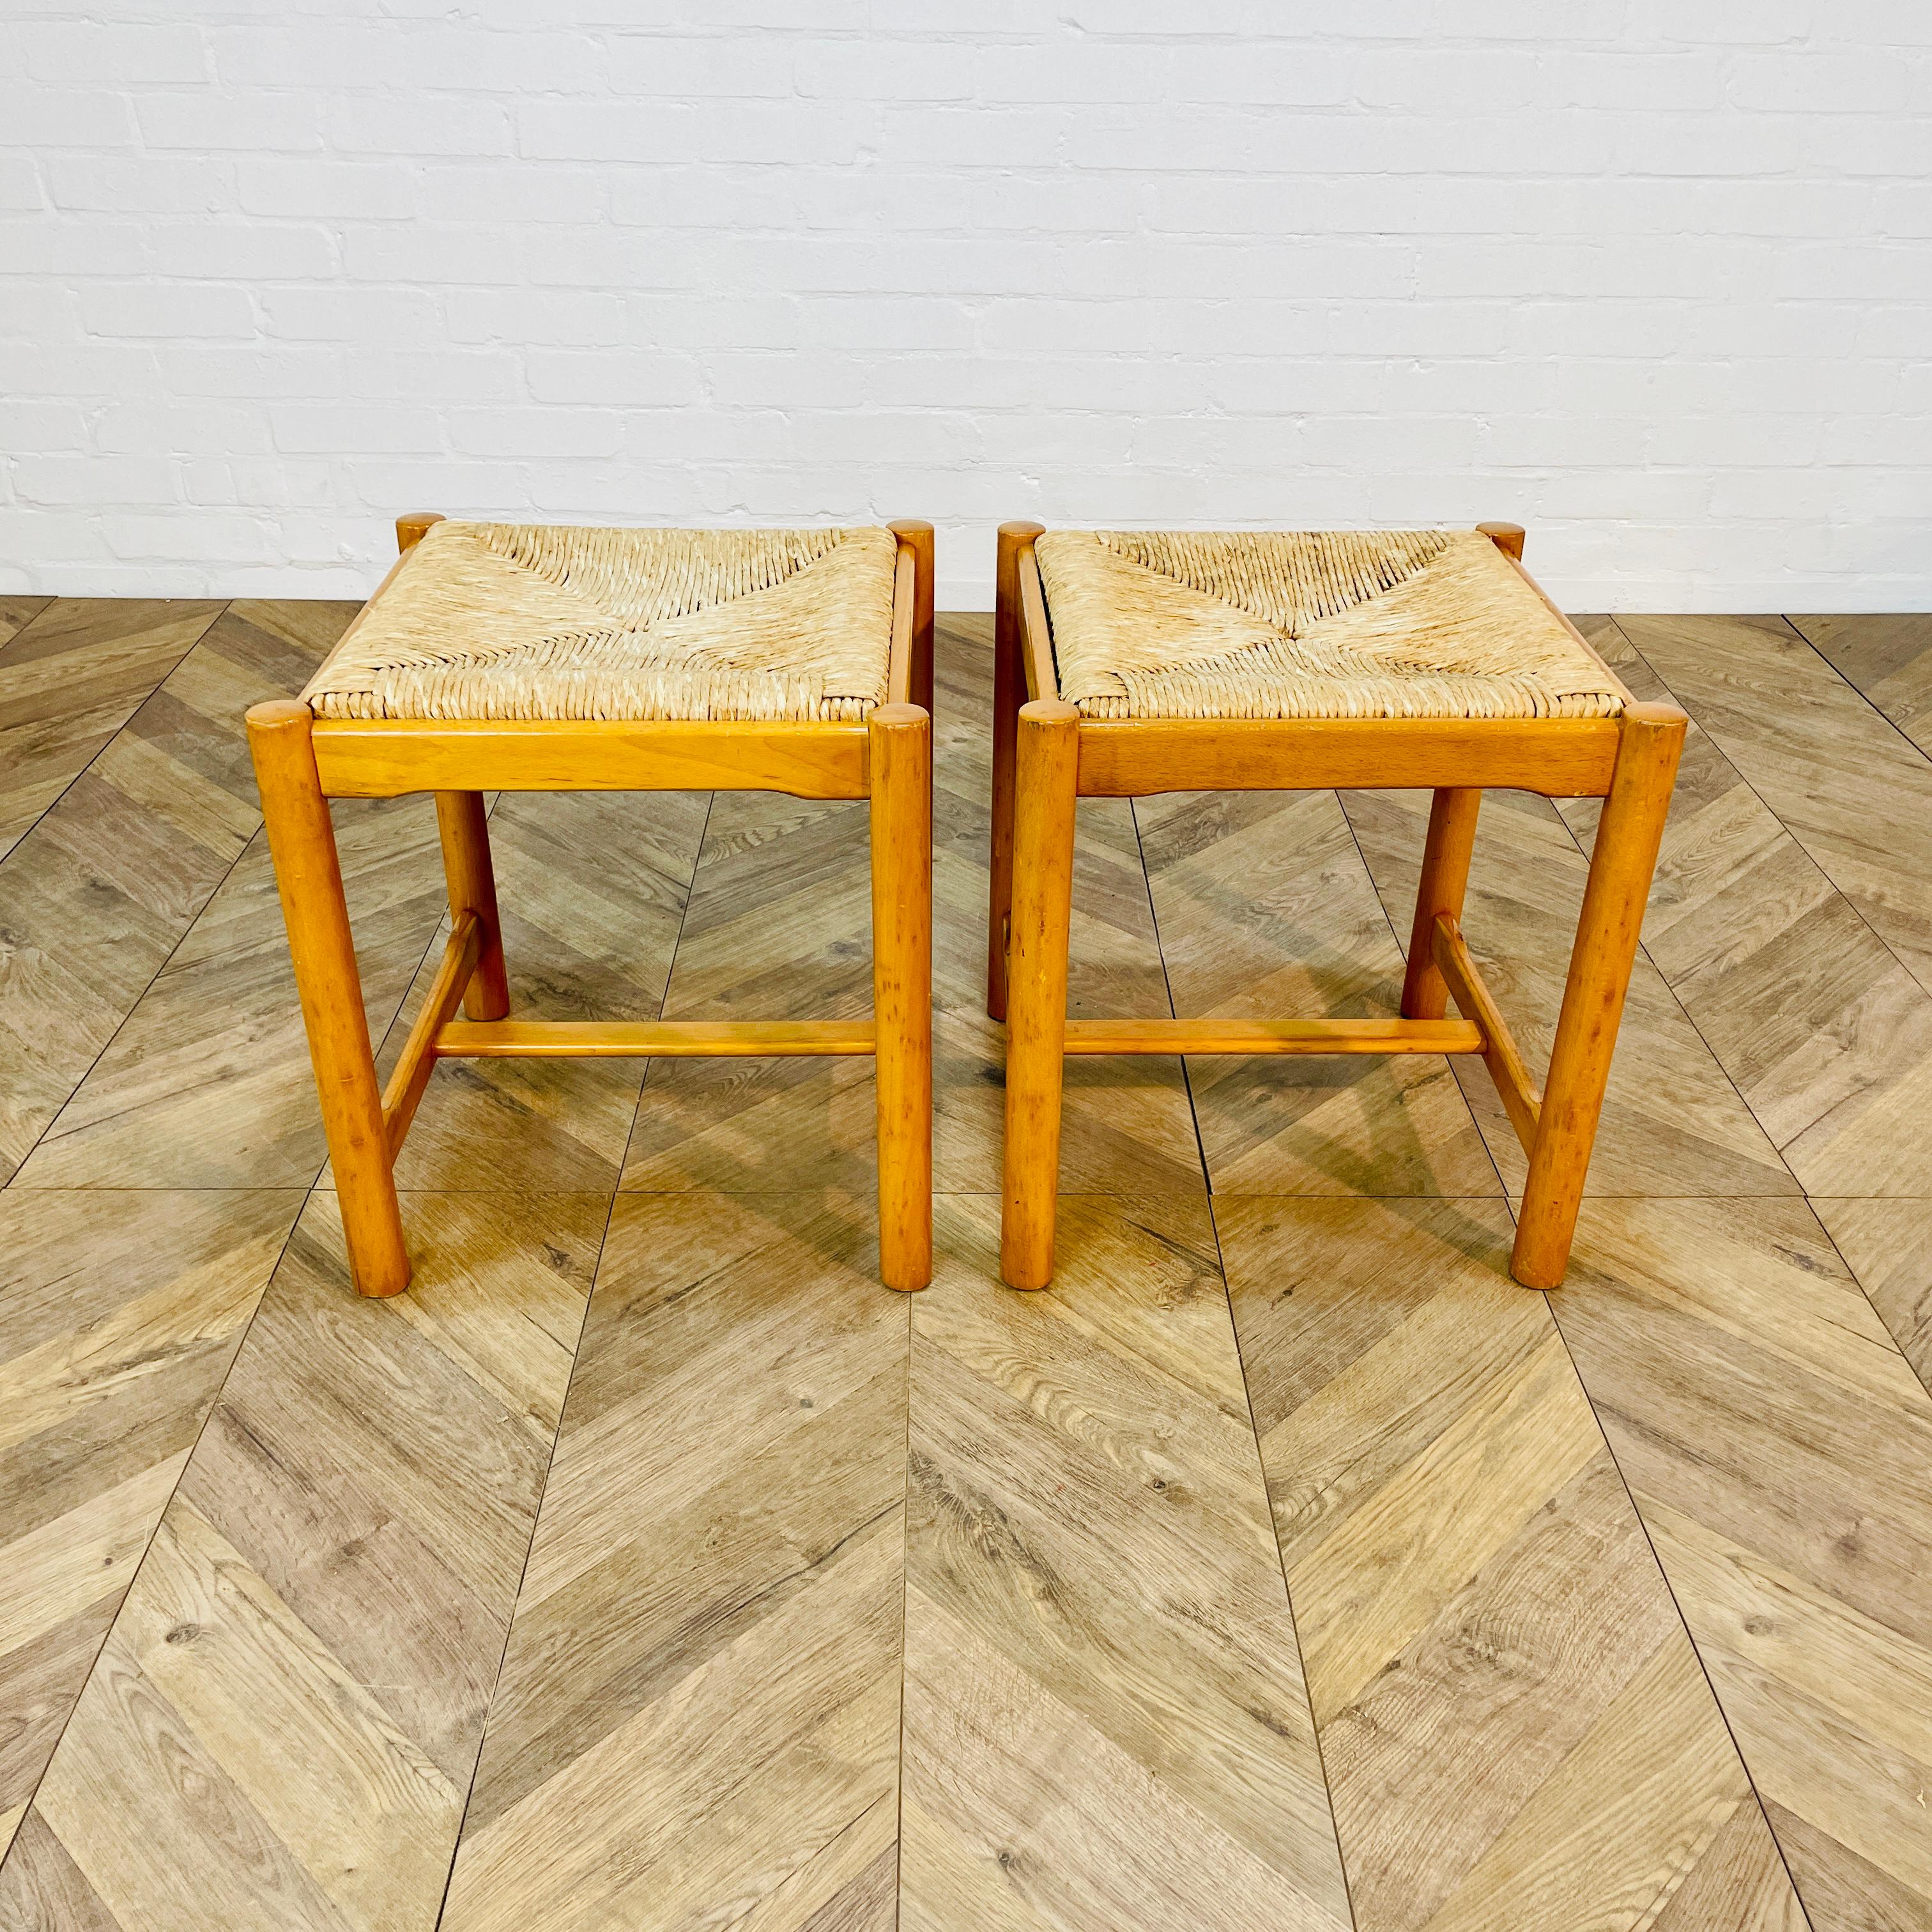 Vintage Mid Century Italian Stools, After Vico Magistretti, Set of 2, circa 1970 In Good Condition For Sale In Ely, GB